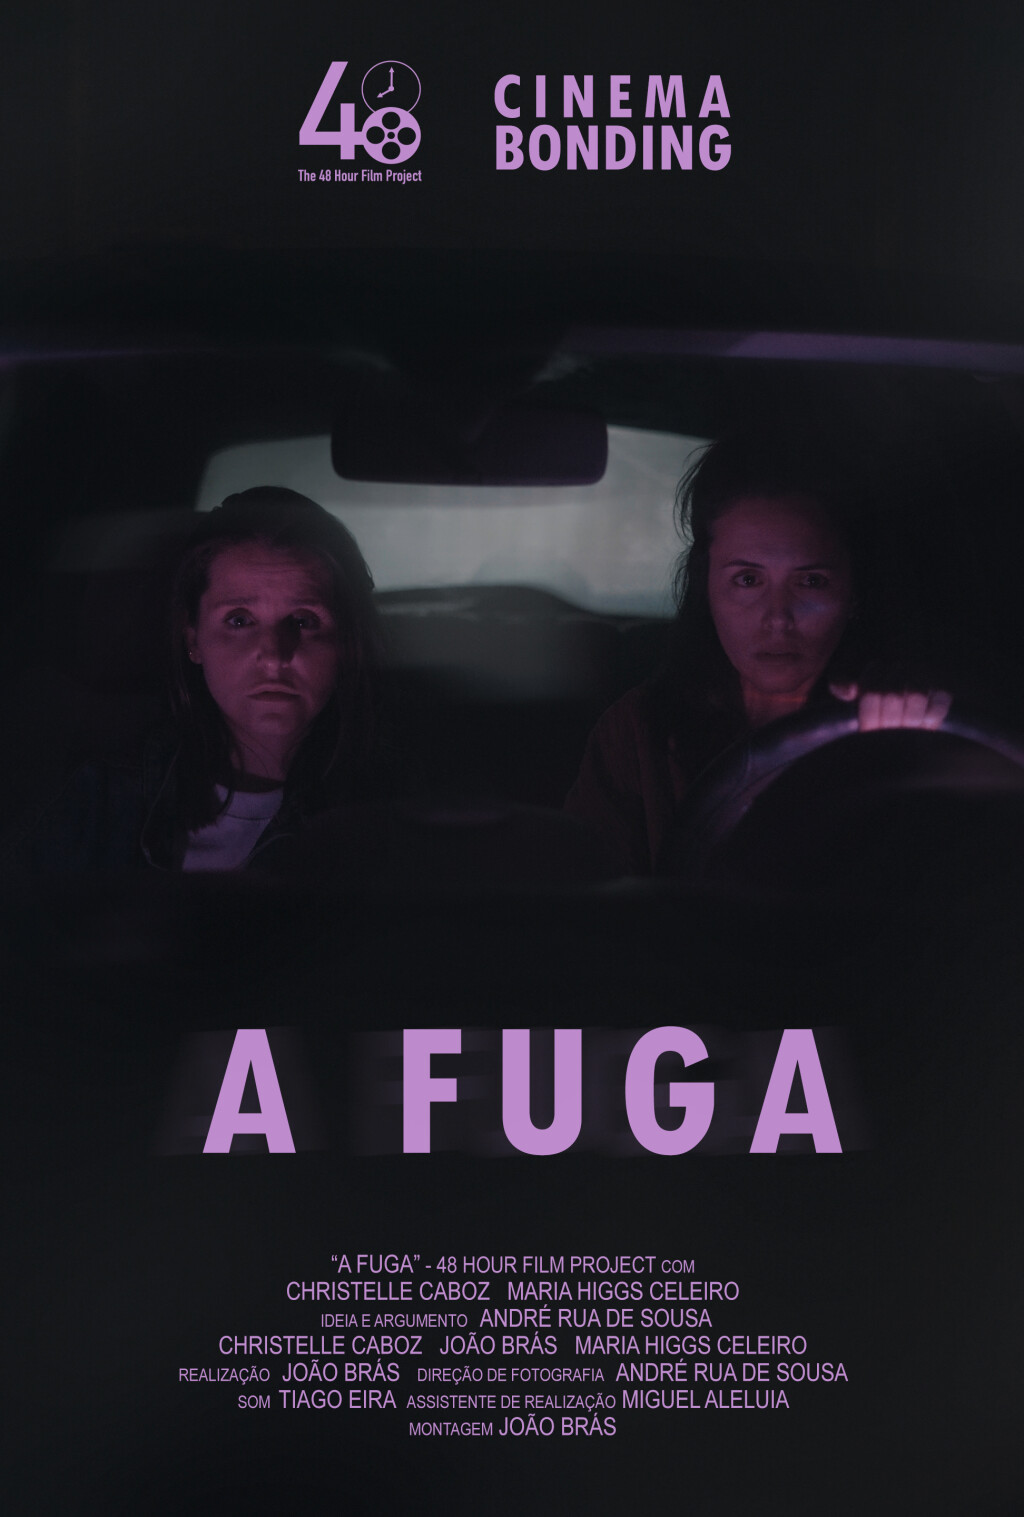 Filmposter for A Fuga